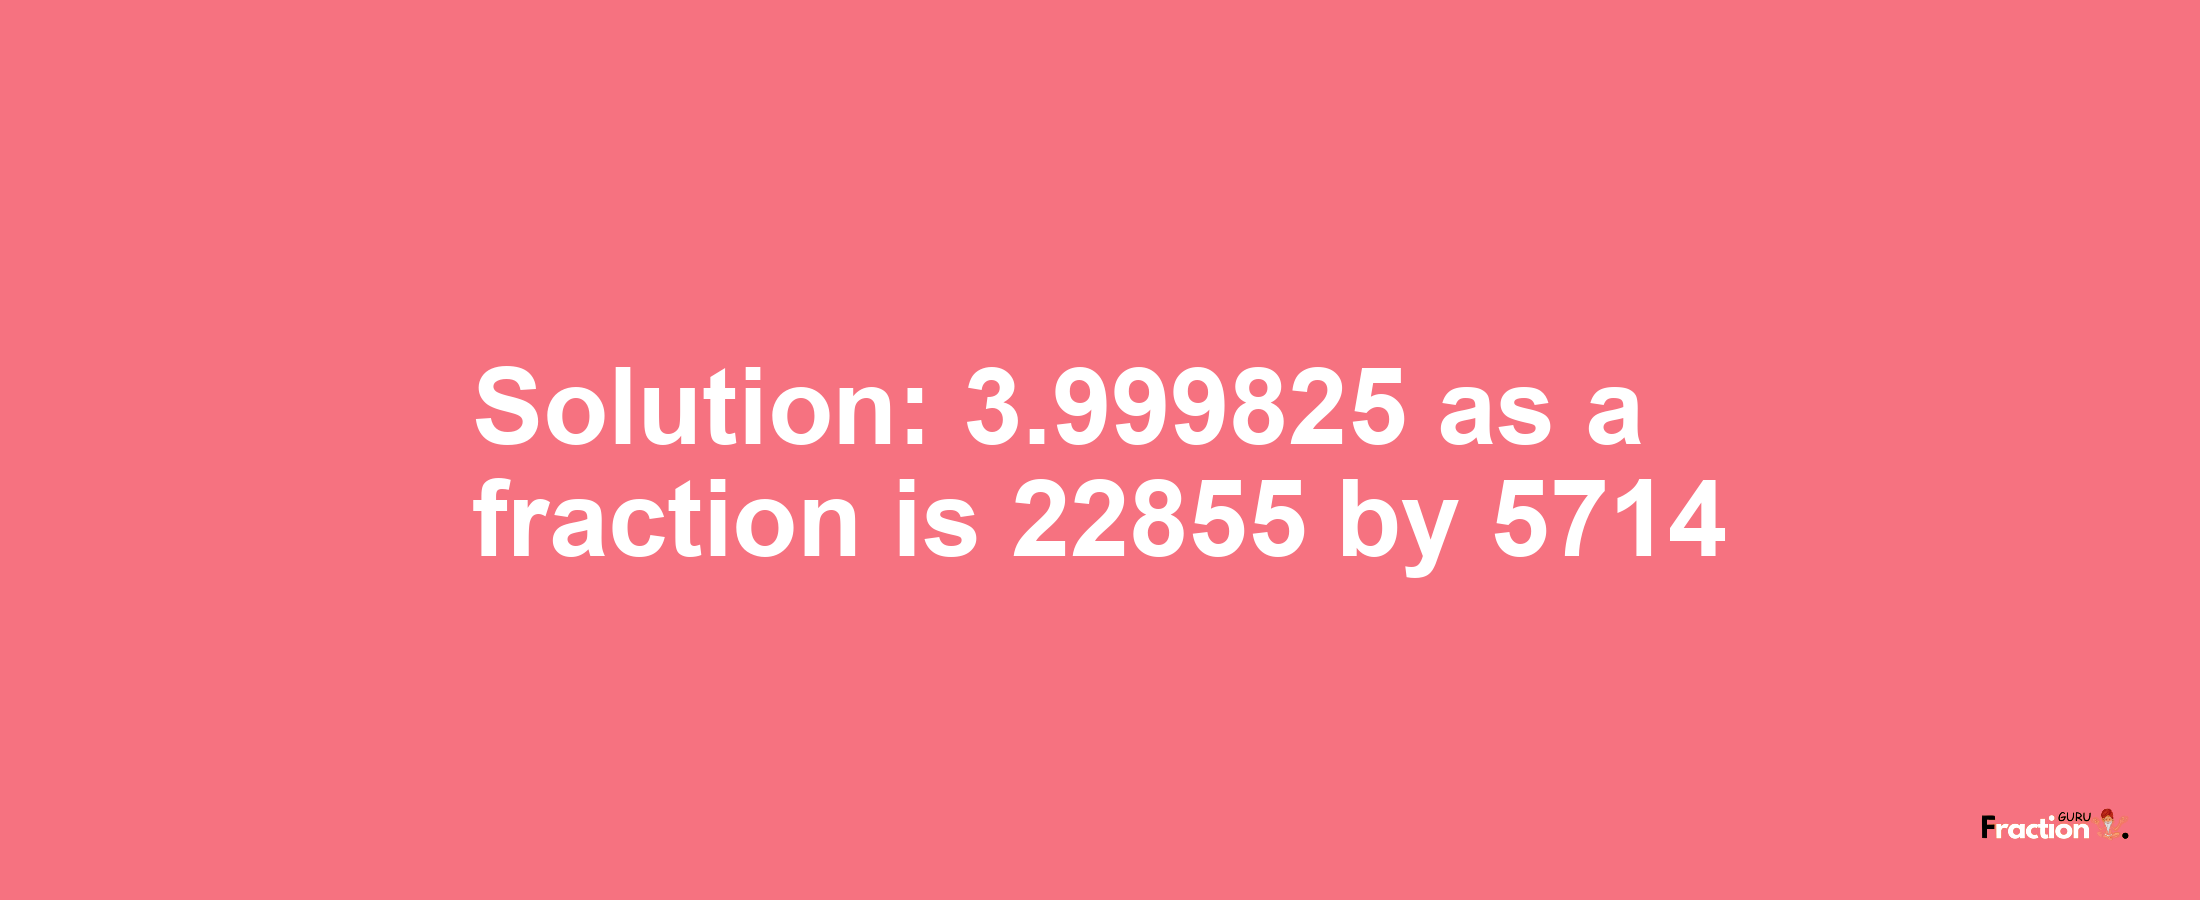 Solution:3.999825 as a fraction is 22855/5714